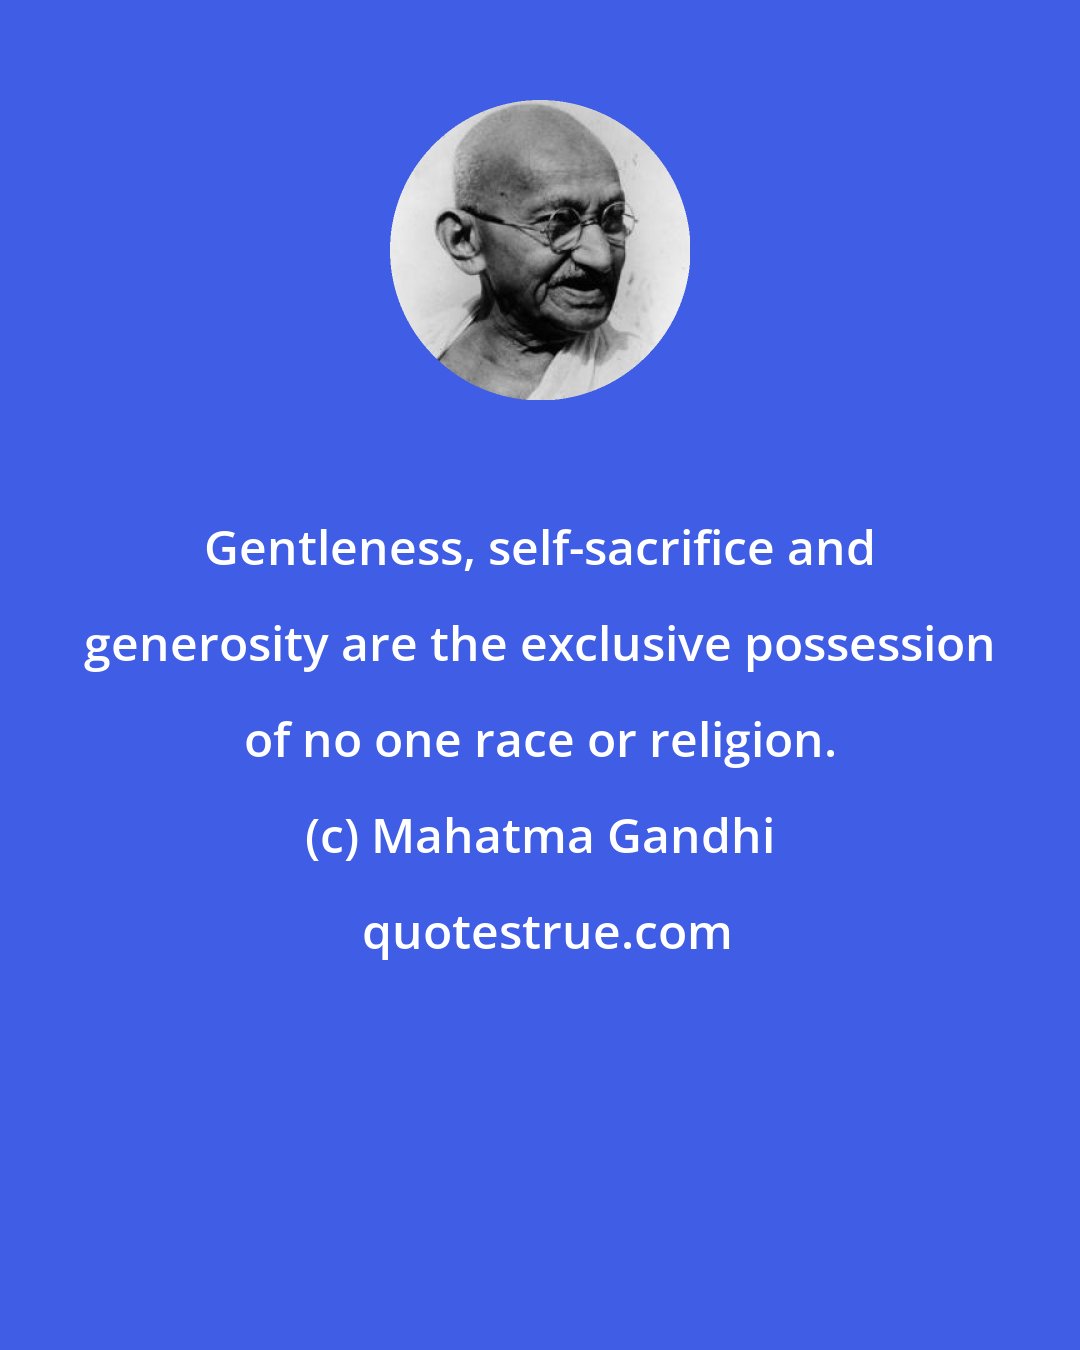 Mahatma Gandhi: Gentleness, self-sacrifice and generosity are the exclusive possession of no one race or religion.